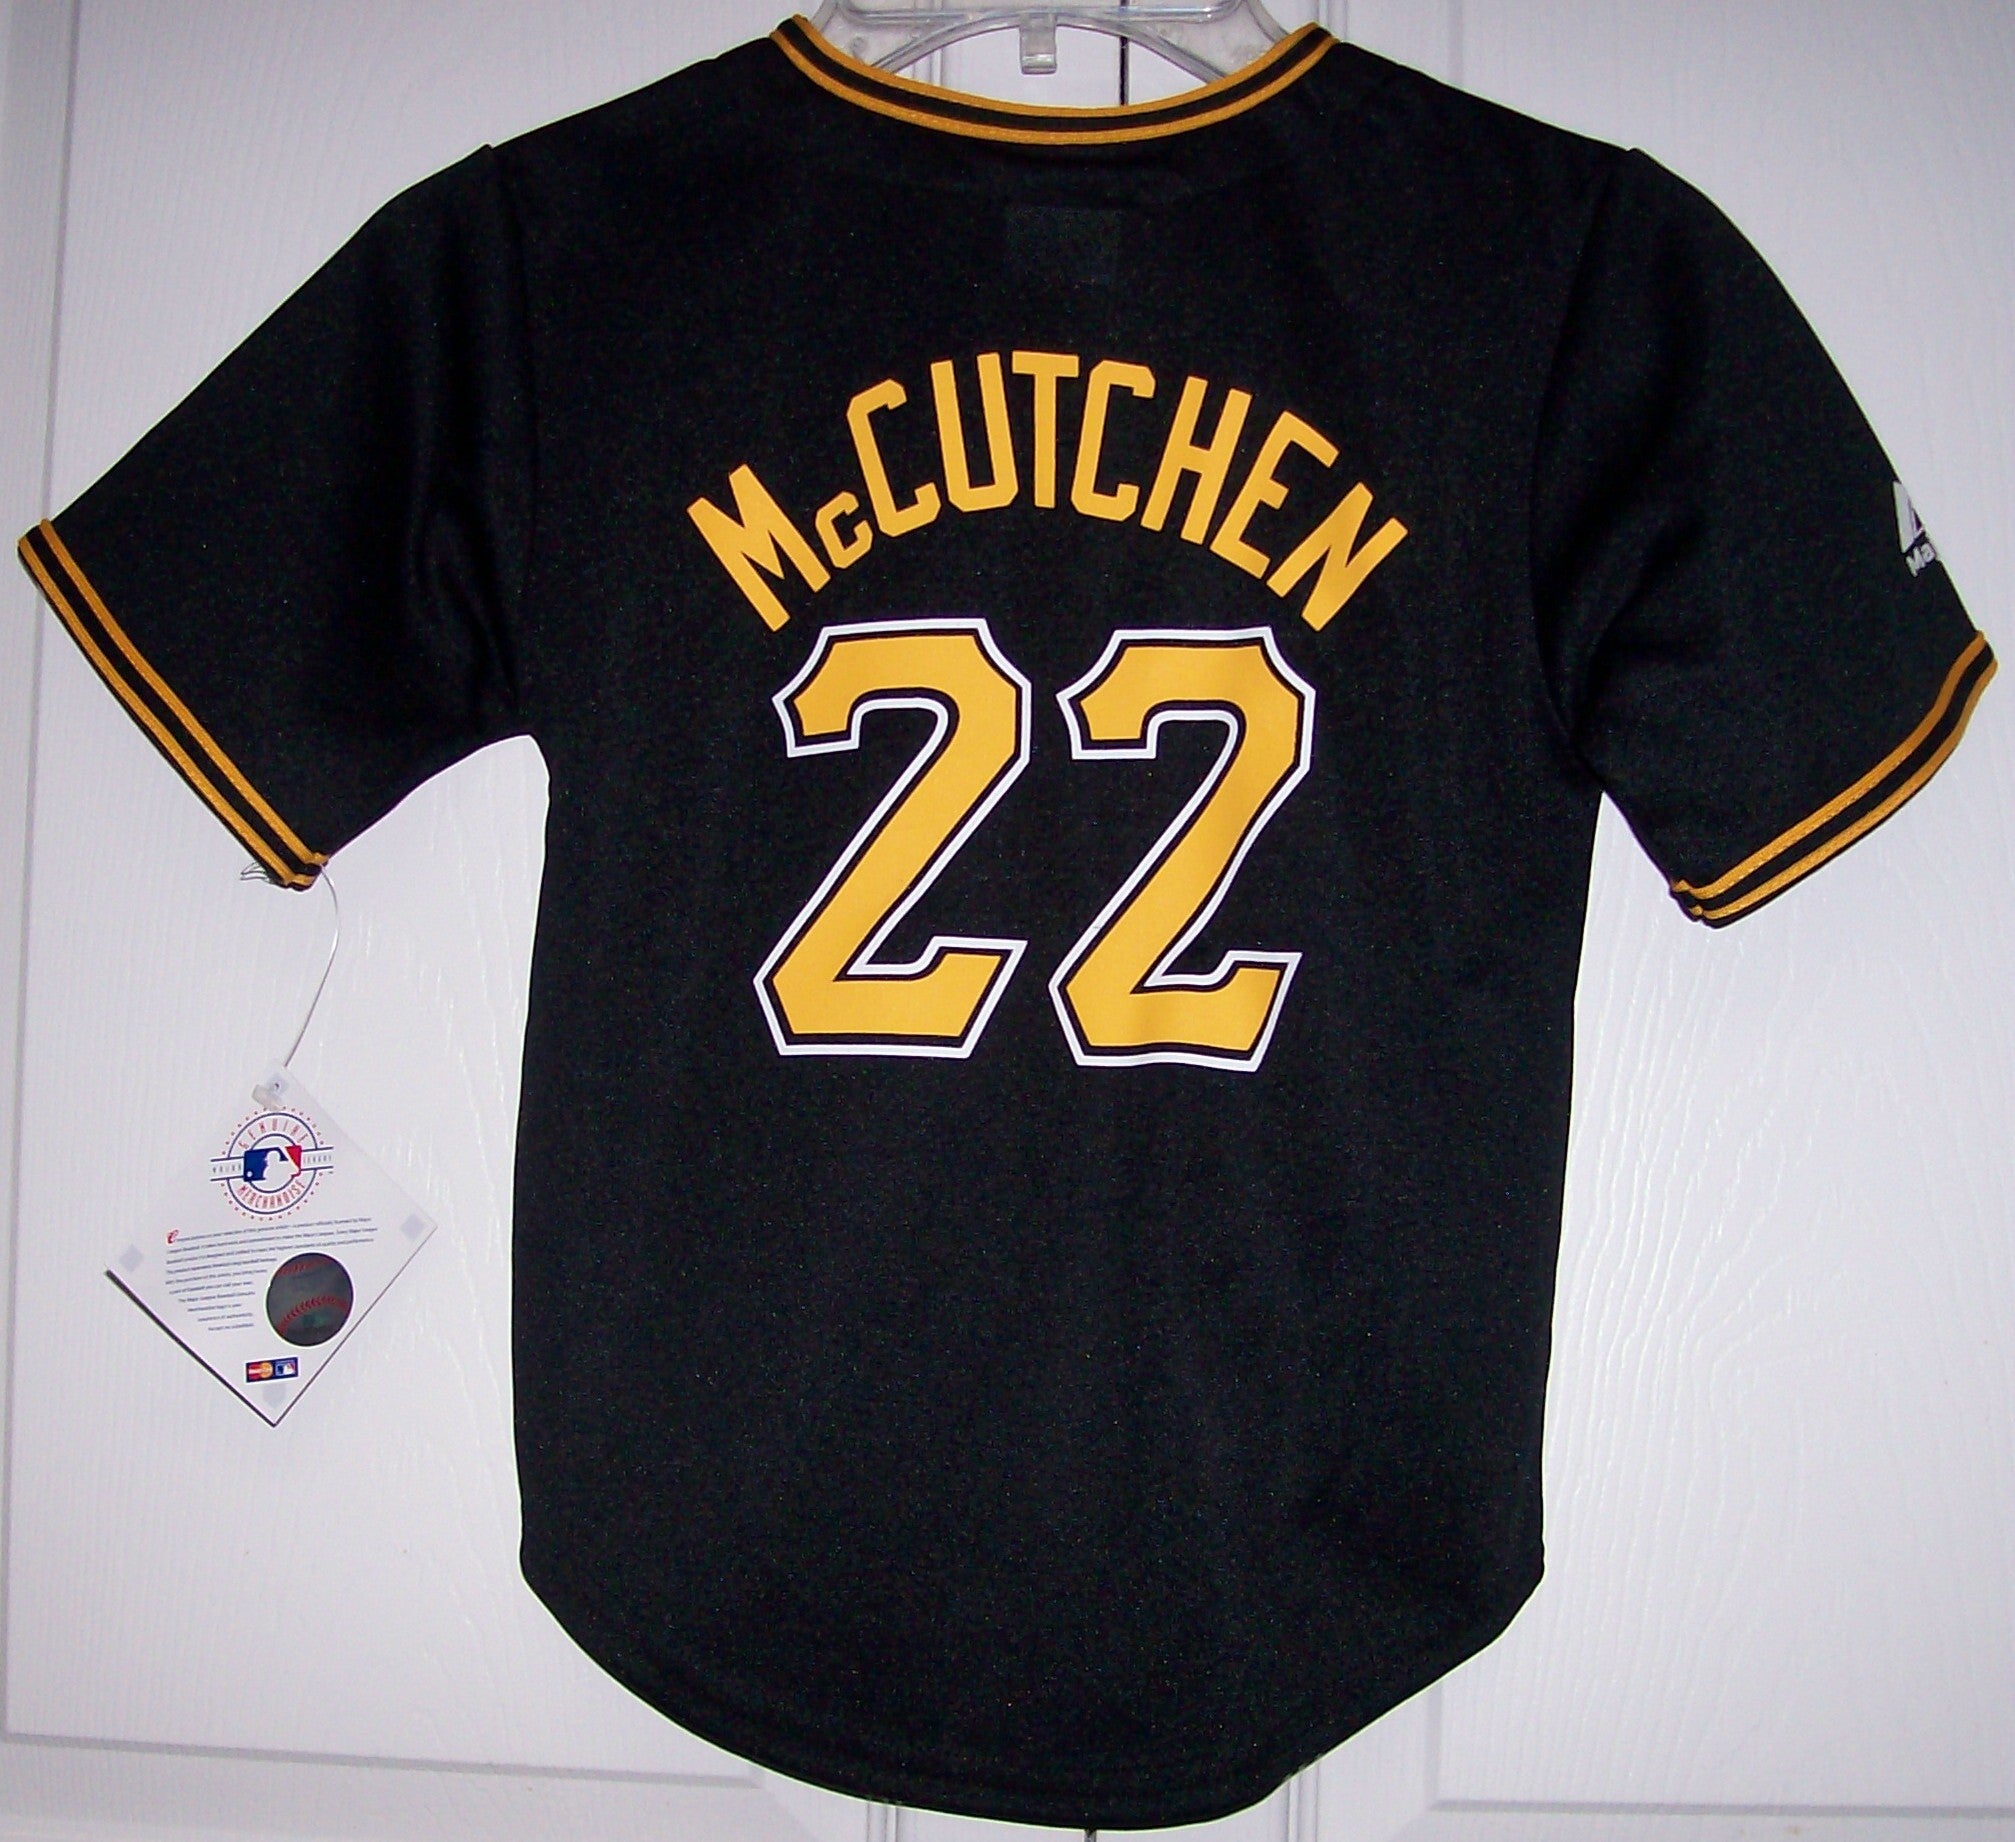 Pittsburgh Pirates 412 'The Burgh' Patch Pennsylvania State Embroidered Major League Baseball